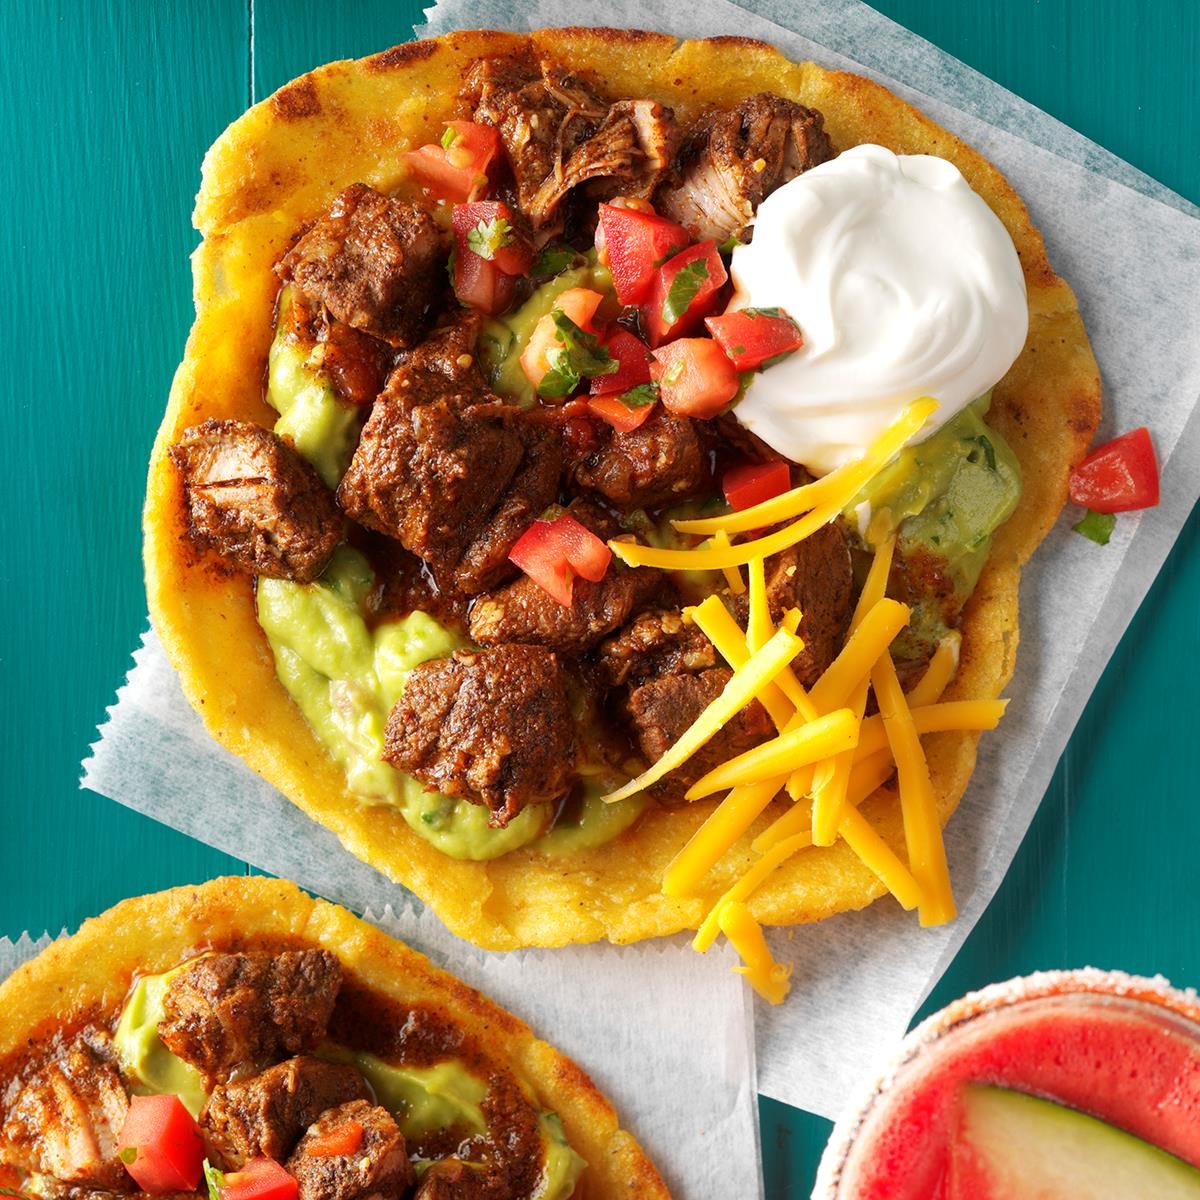 Carne Adovada Sopes Recipe: How to Make It